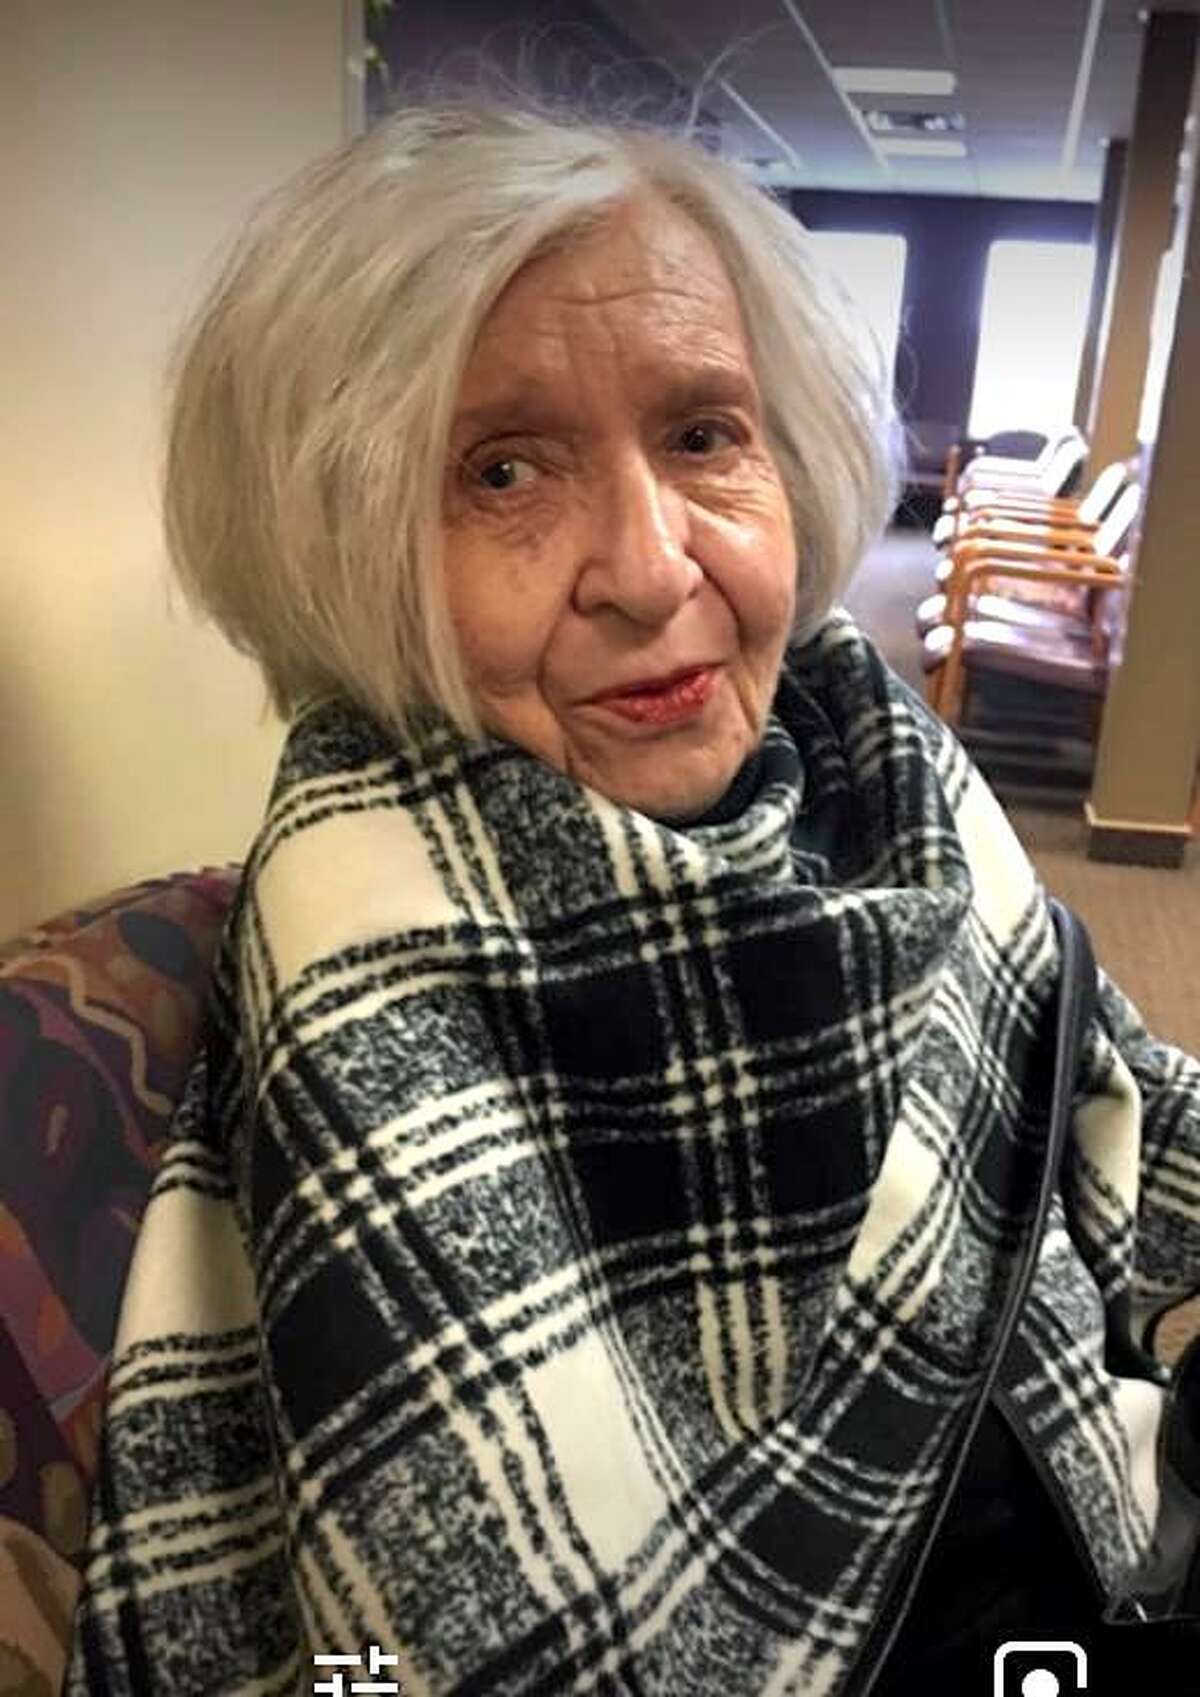 Jerri Glaspie, 91, of Cass City, has a lot of memories of what the community and surrounding towns were like decades ago. Before she settled down to raise a family, she had several adventures.